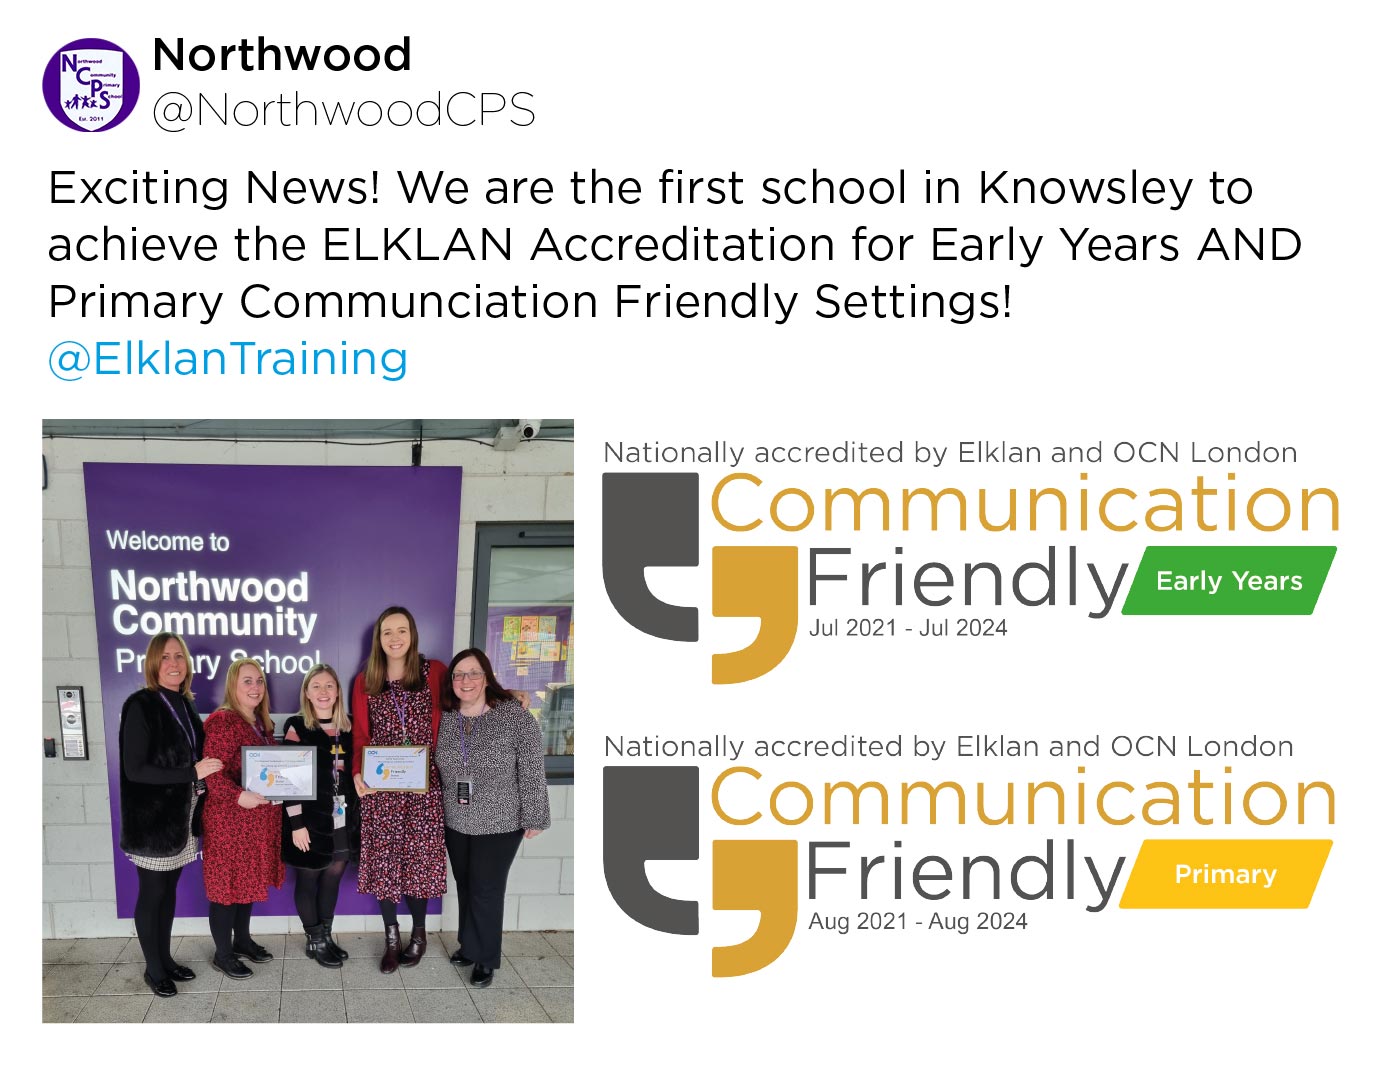 Northwood CPS: Exciting News! We are the first school in Knowsley to acheive the Elklan Accreditation for Early Years AND Primary Communciation Friendly Settings!